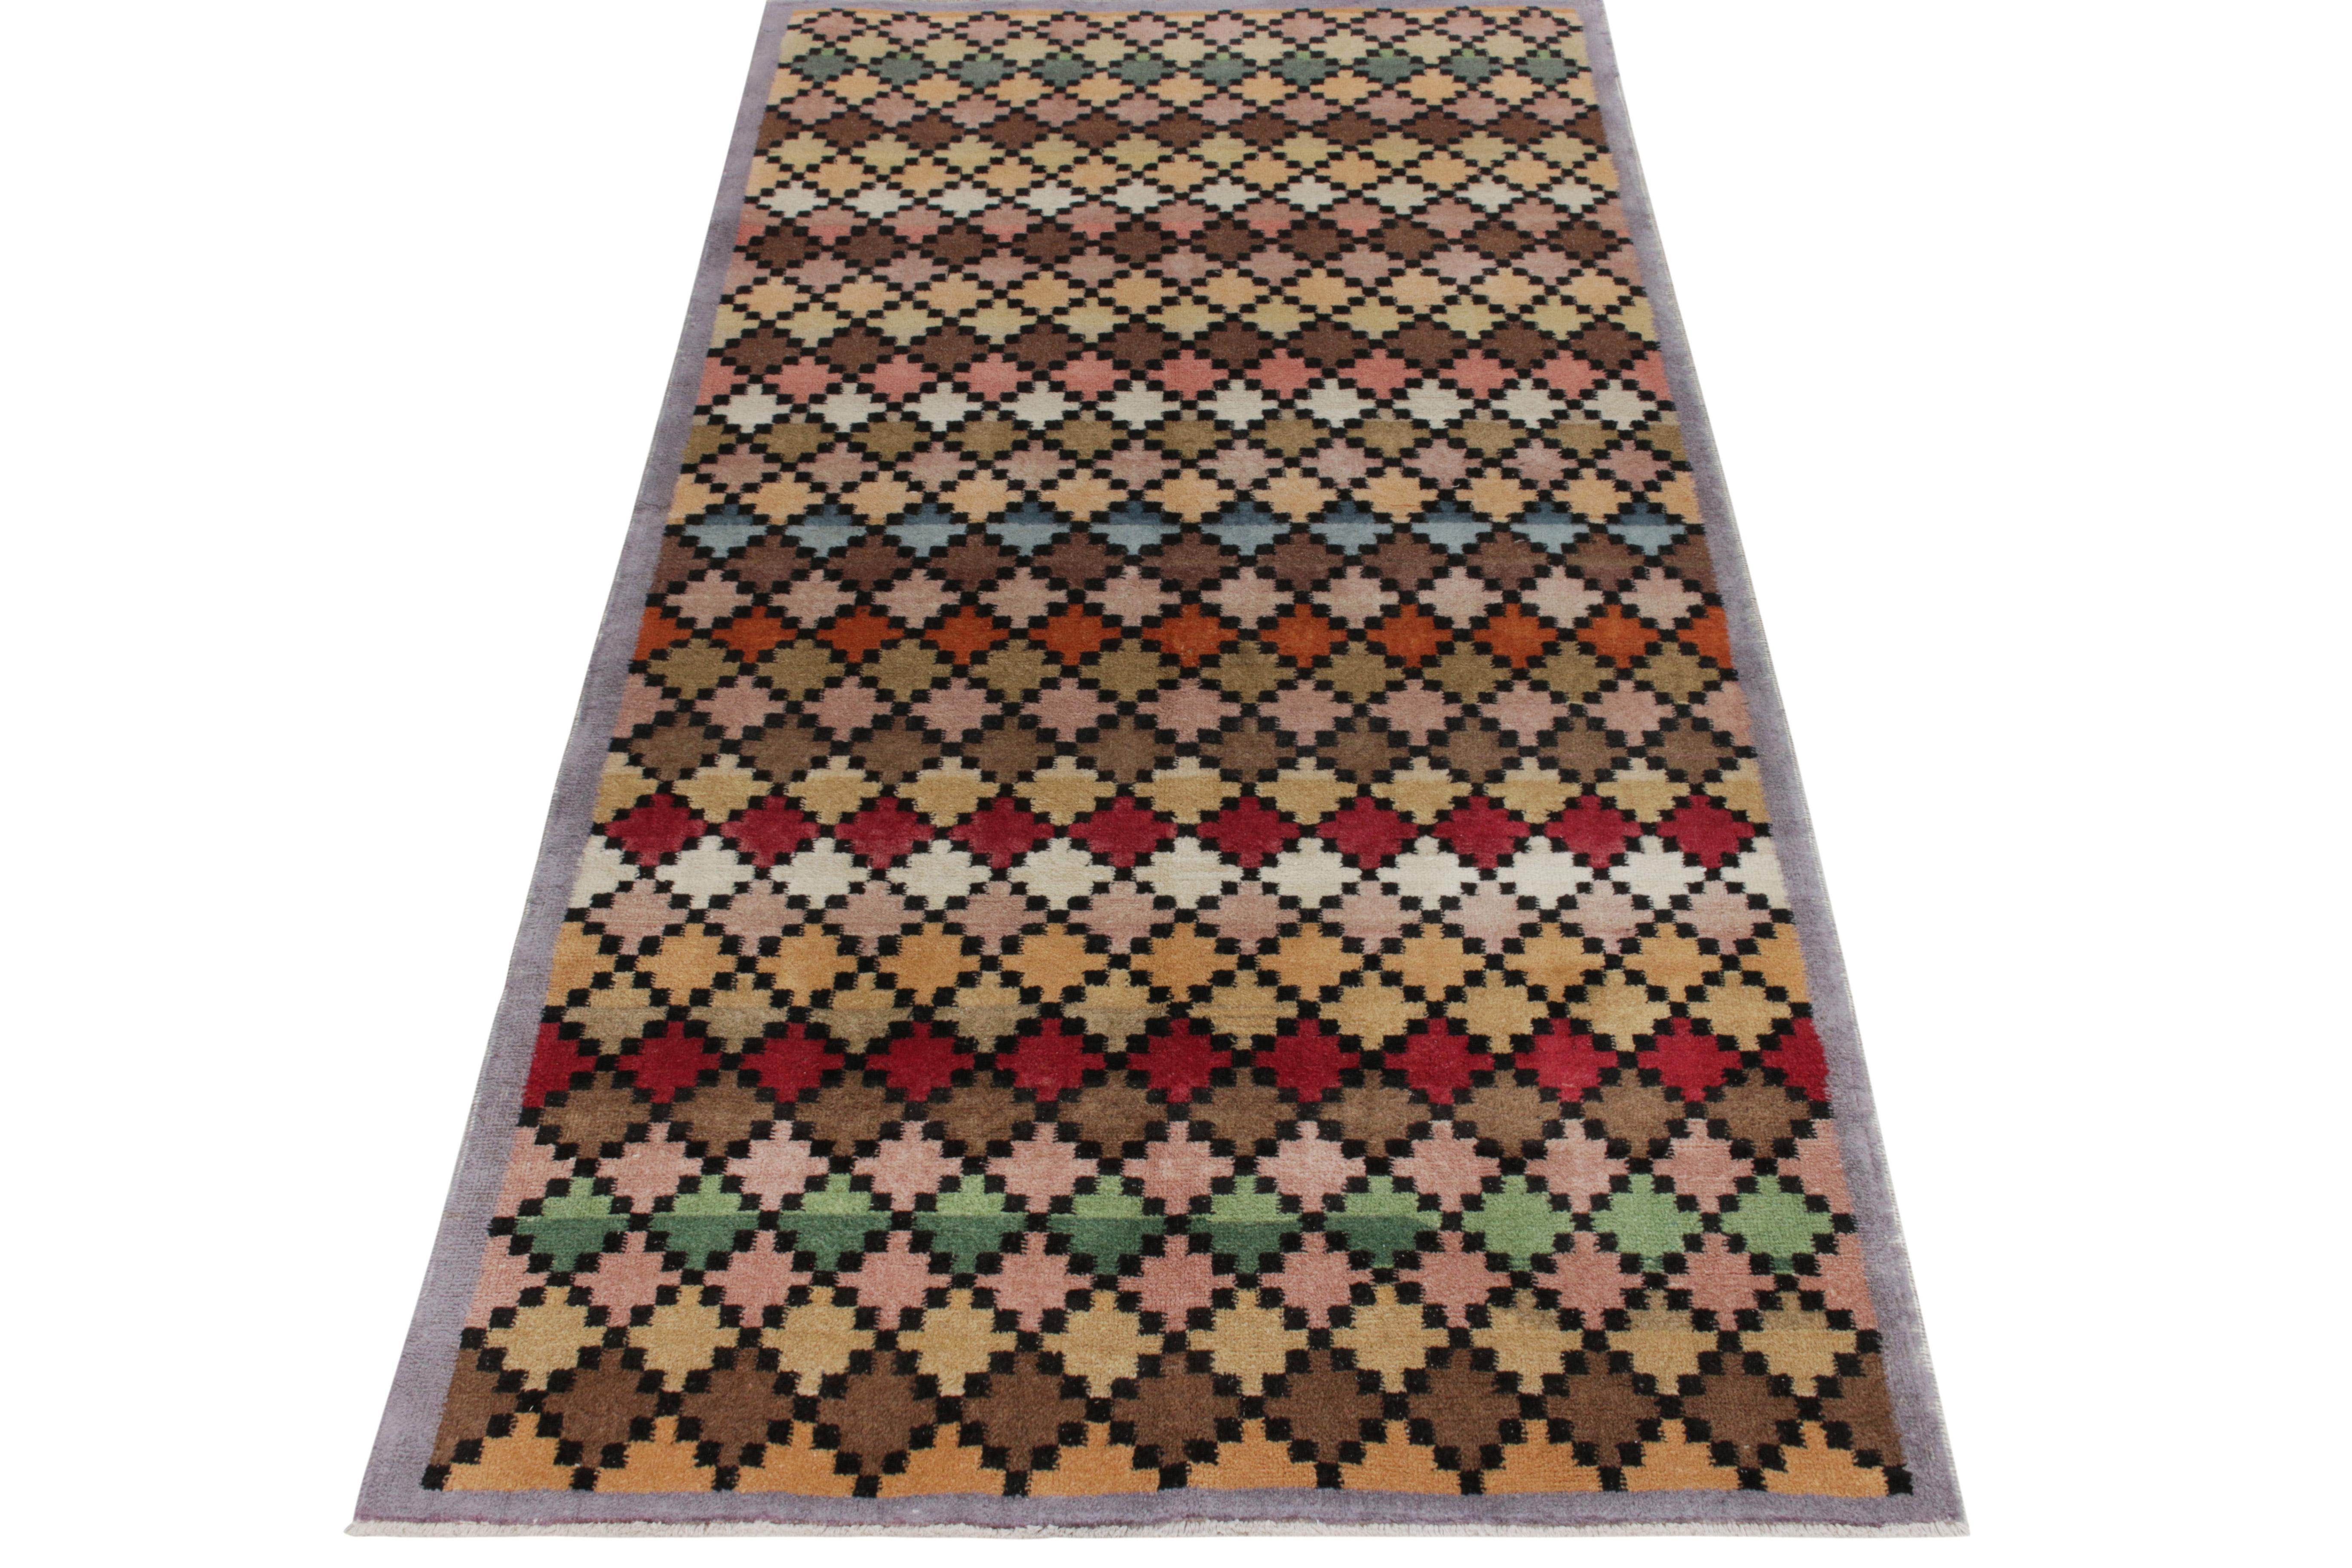 Hand-knotted in wool circa 1960-1970, a 4X8 vintage rug from an Bold Turkish designer commemorated in Rug & Kilim’s Mid-Century Pasha Collection, featuring a series of geometric patterns in neat repetition for exceptional pagination on scale.